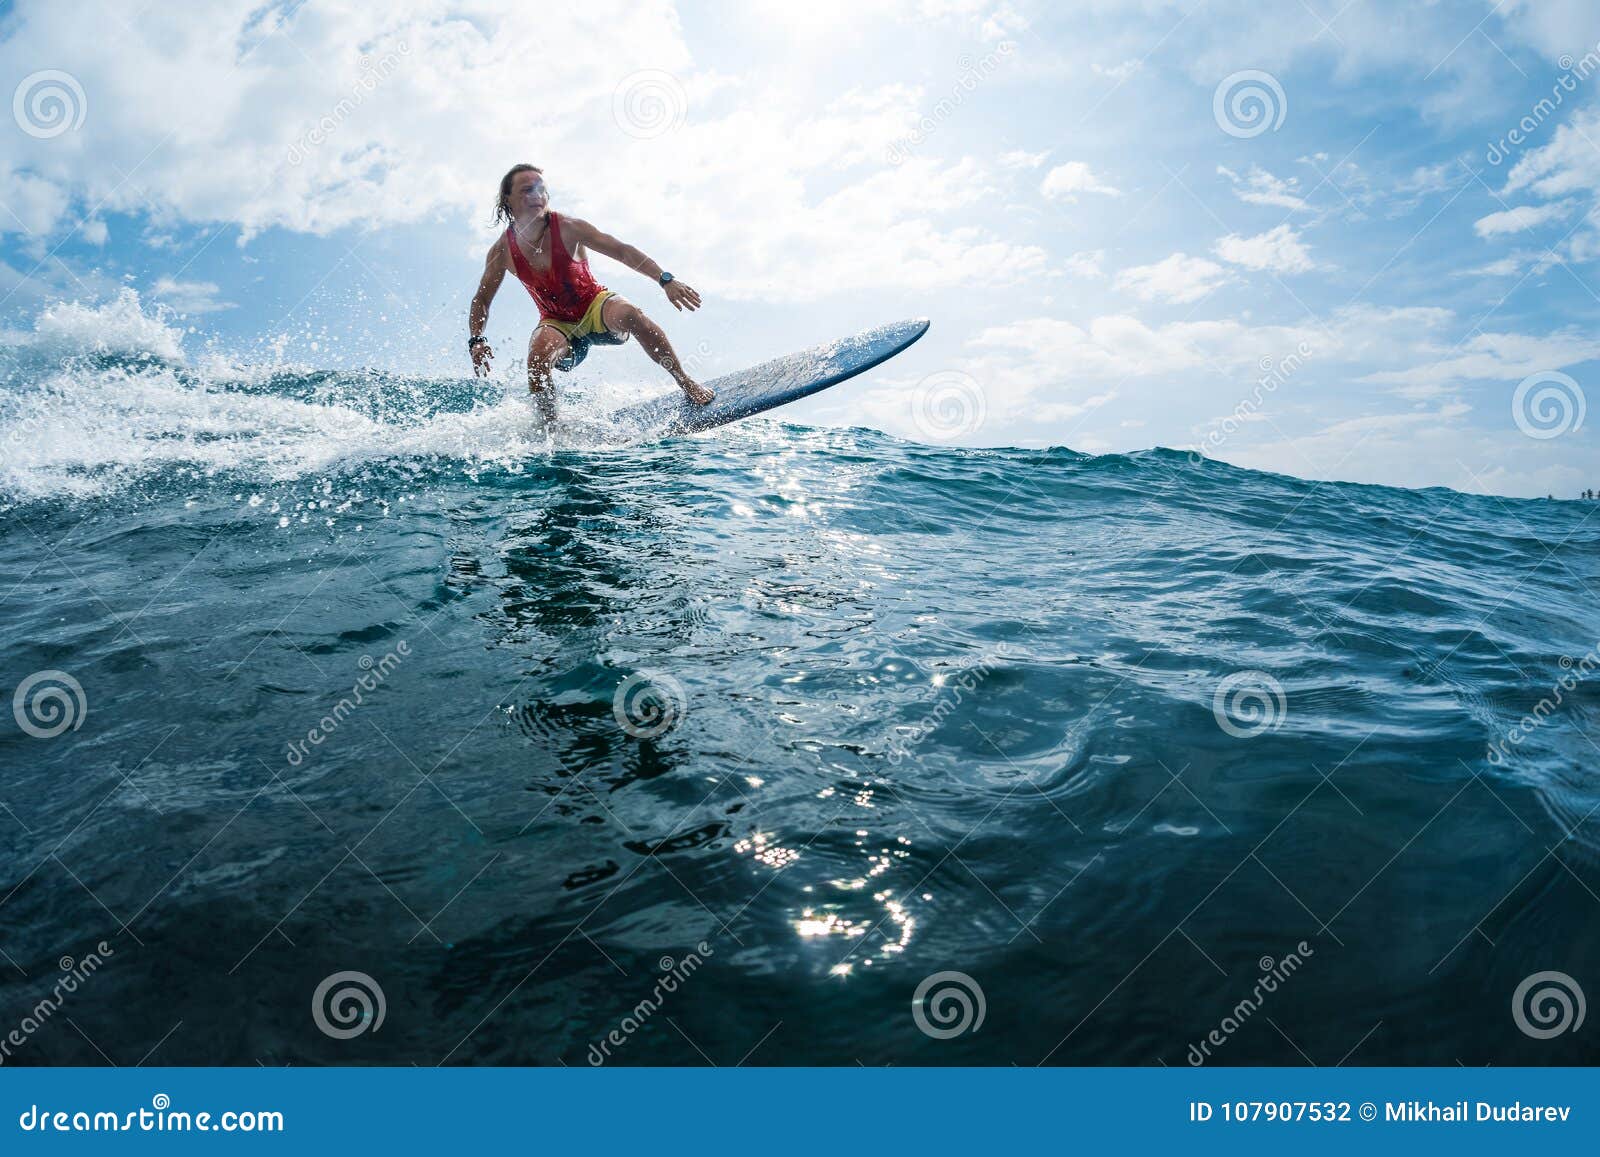 Surfer rides the wave stock photo. Image of alone, glide - 107907532